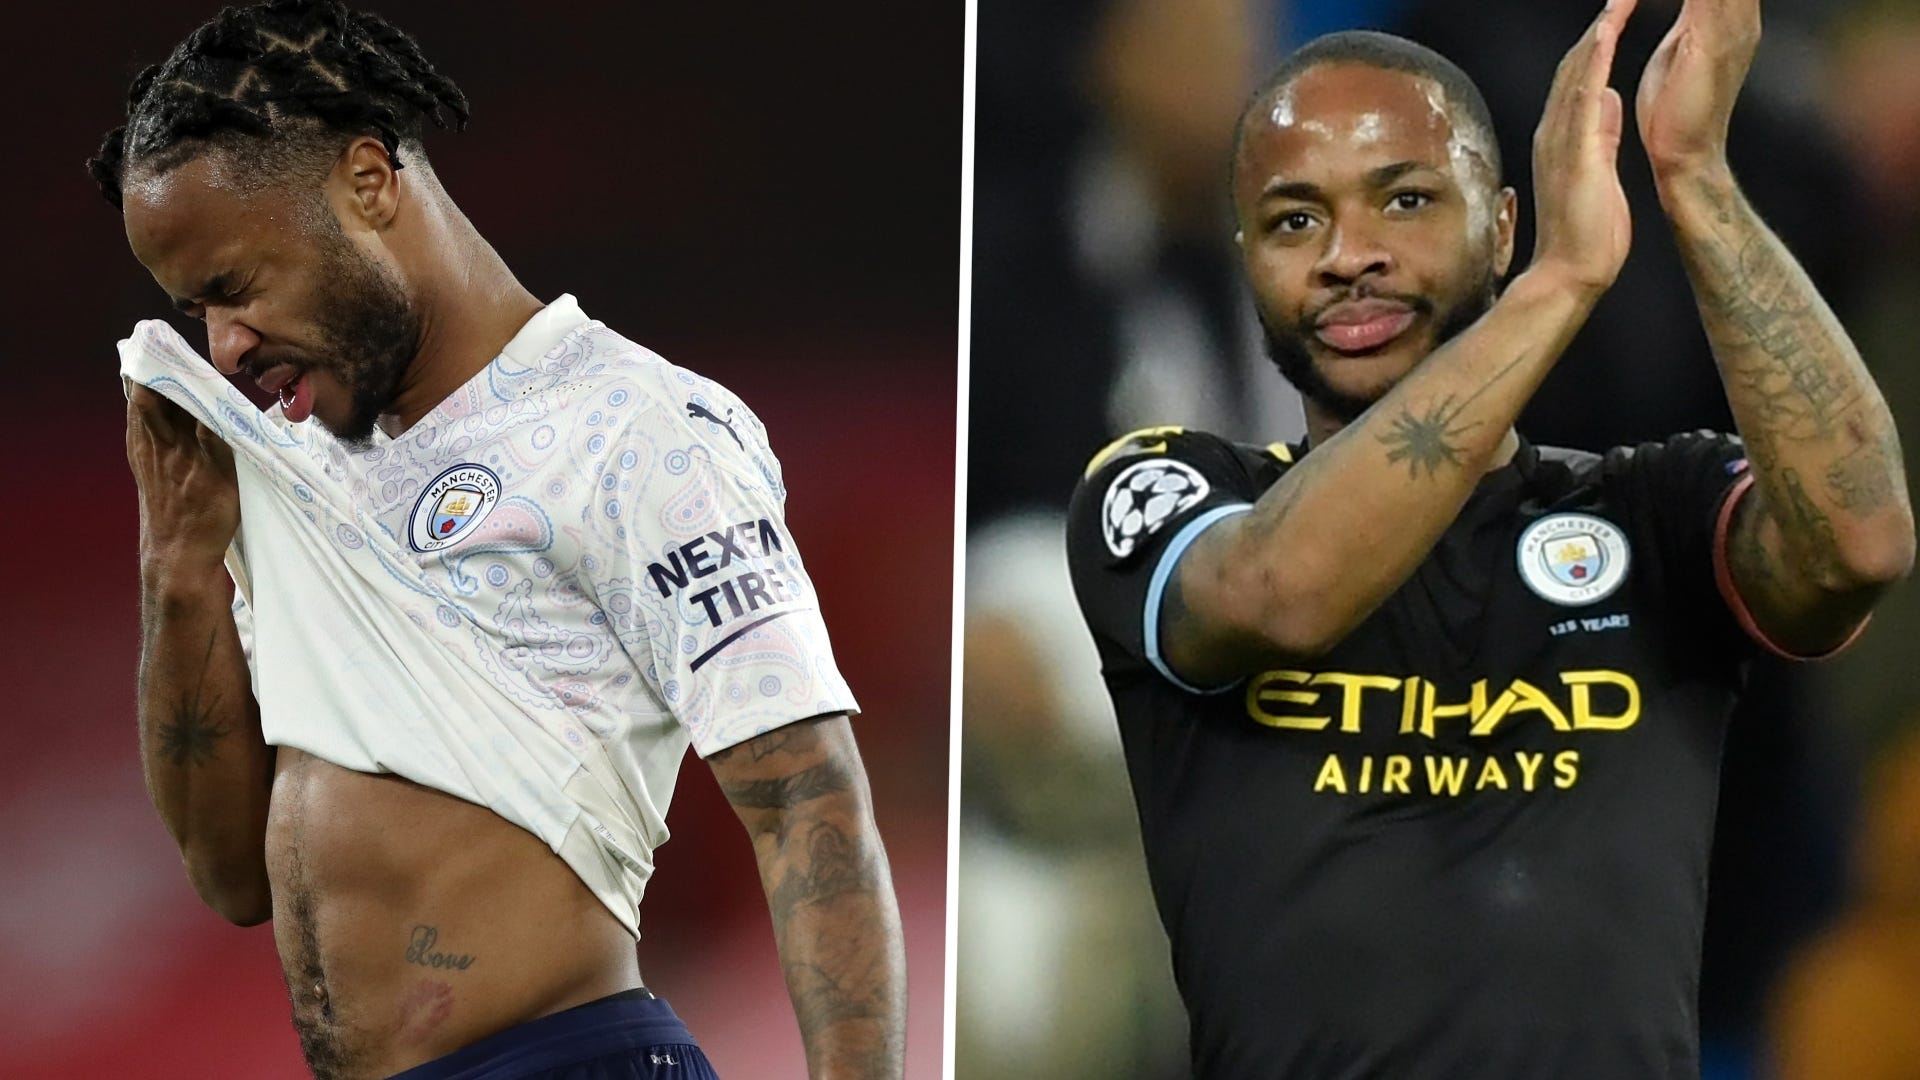 Raheem Sterling's tattoos explained: What do they mean and where are they on his body?